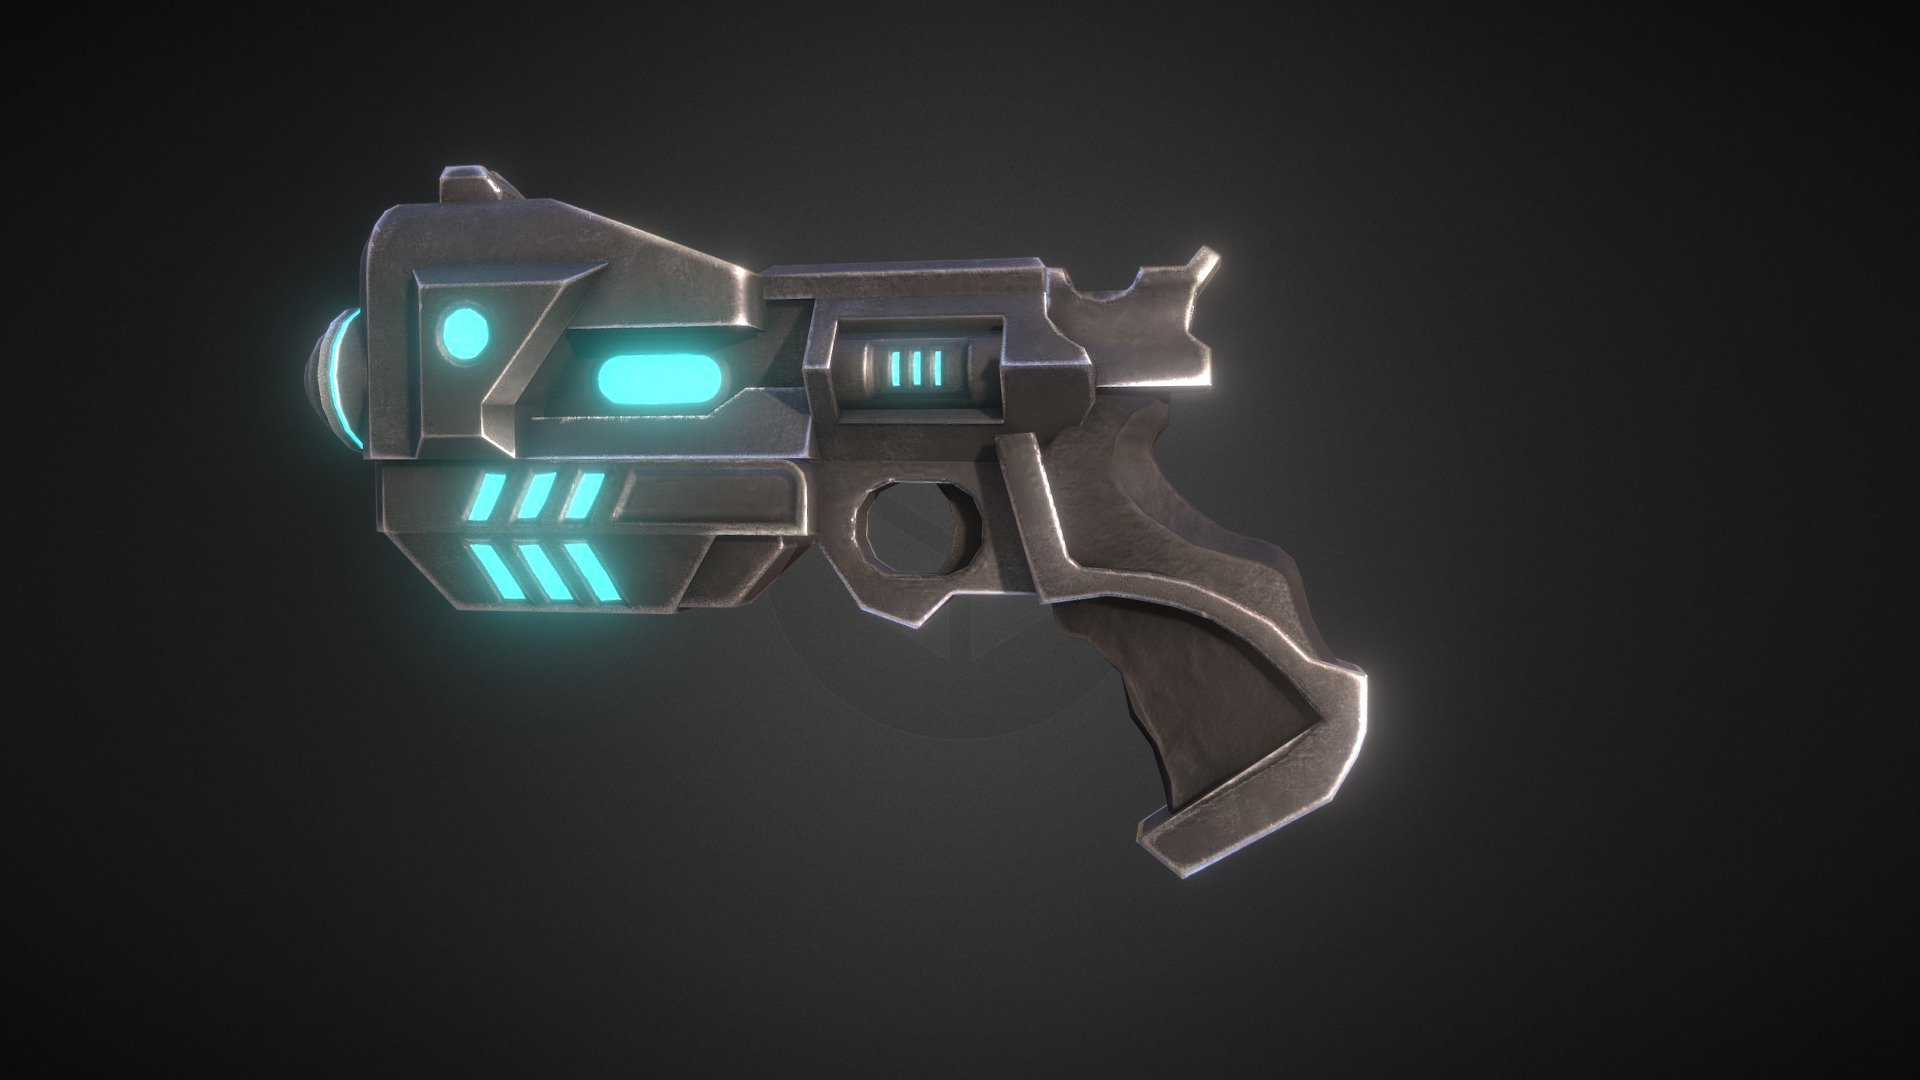 These Pistols have 1k textures and all animations needed for an fps game.

Check out our Patreon: https://www.patreon.com/antsaarealamaa

My Youtube Channel:https://www.youtube.com/channel/UCYnwjFSDDj4zEa5yb4wxMFA

My Artstation:https://www.artstation.com/antsaare - Pistols - Buy Royalty Free 3D model by Ants Aare Alamaa (@AntsAare) 3d model